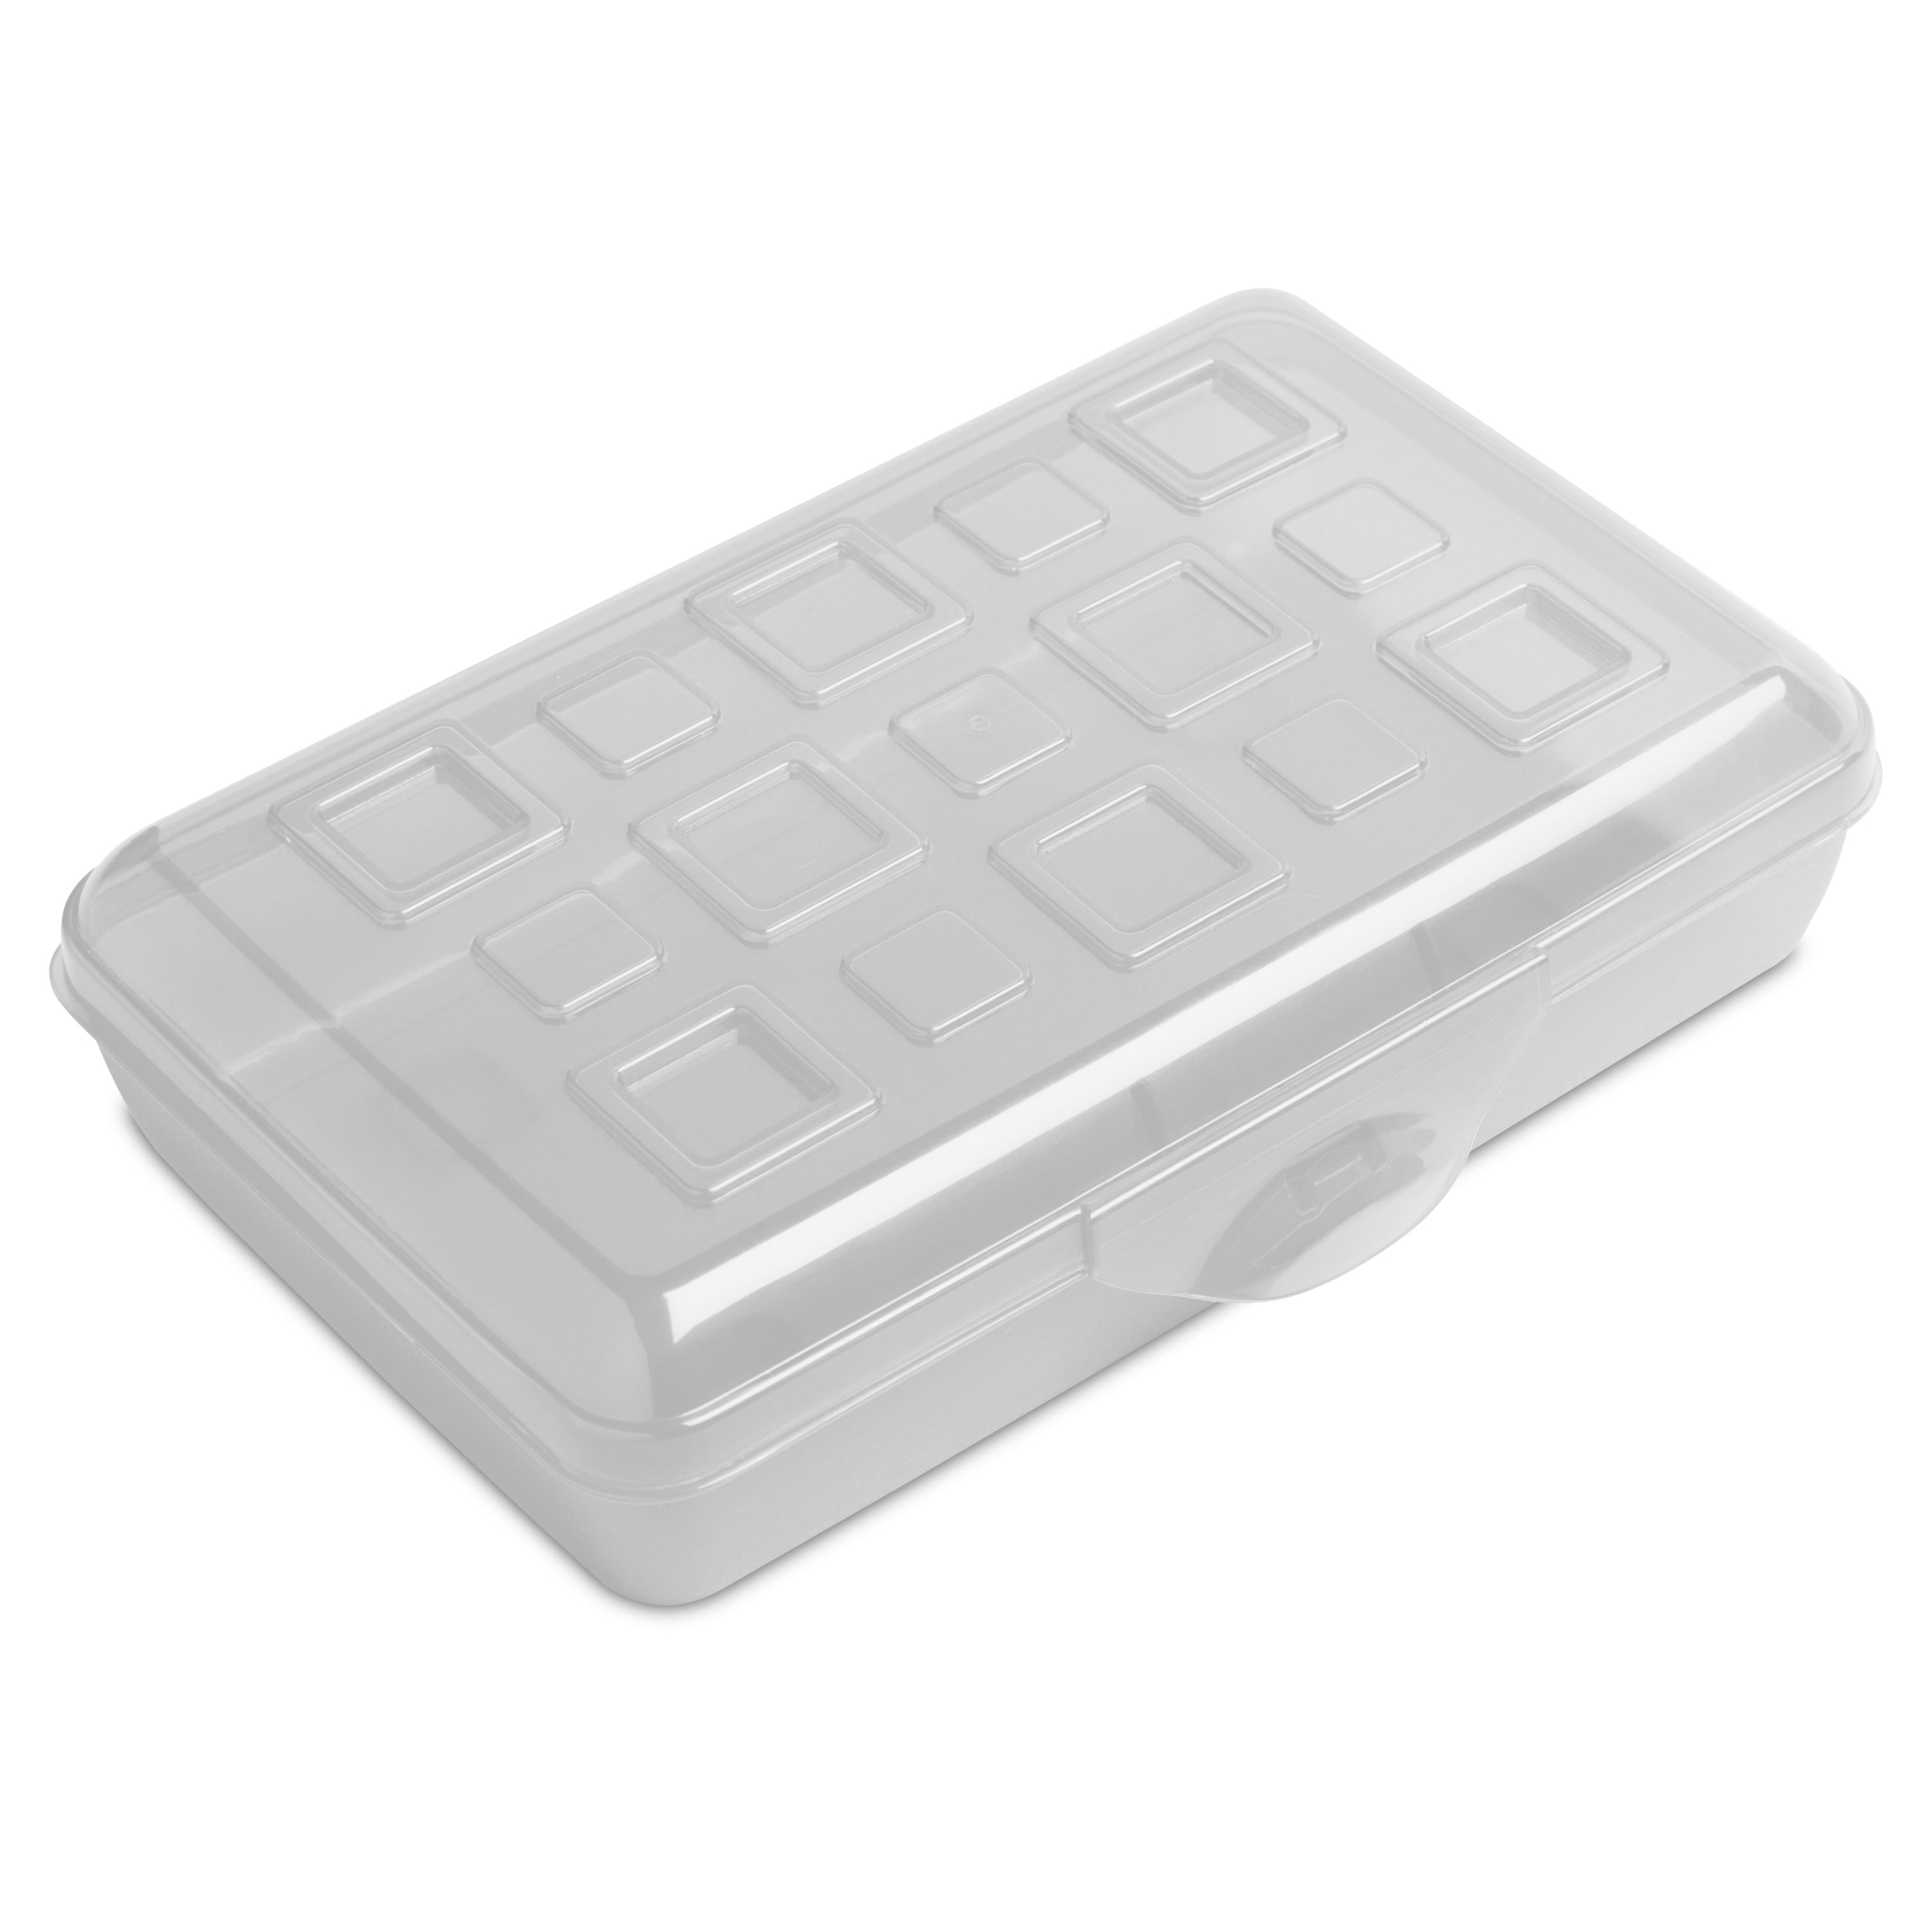 Hard Plastic Butterfly Details about   New Slider Pencil Box Staples Brand With Buckle Closure 